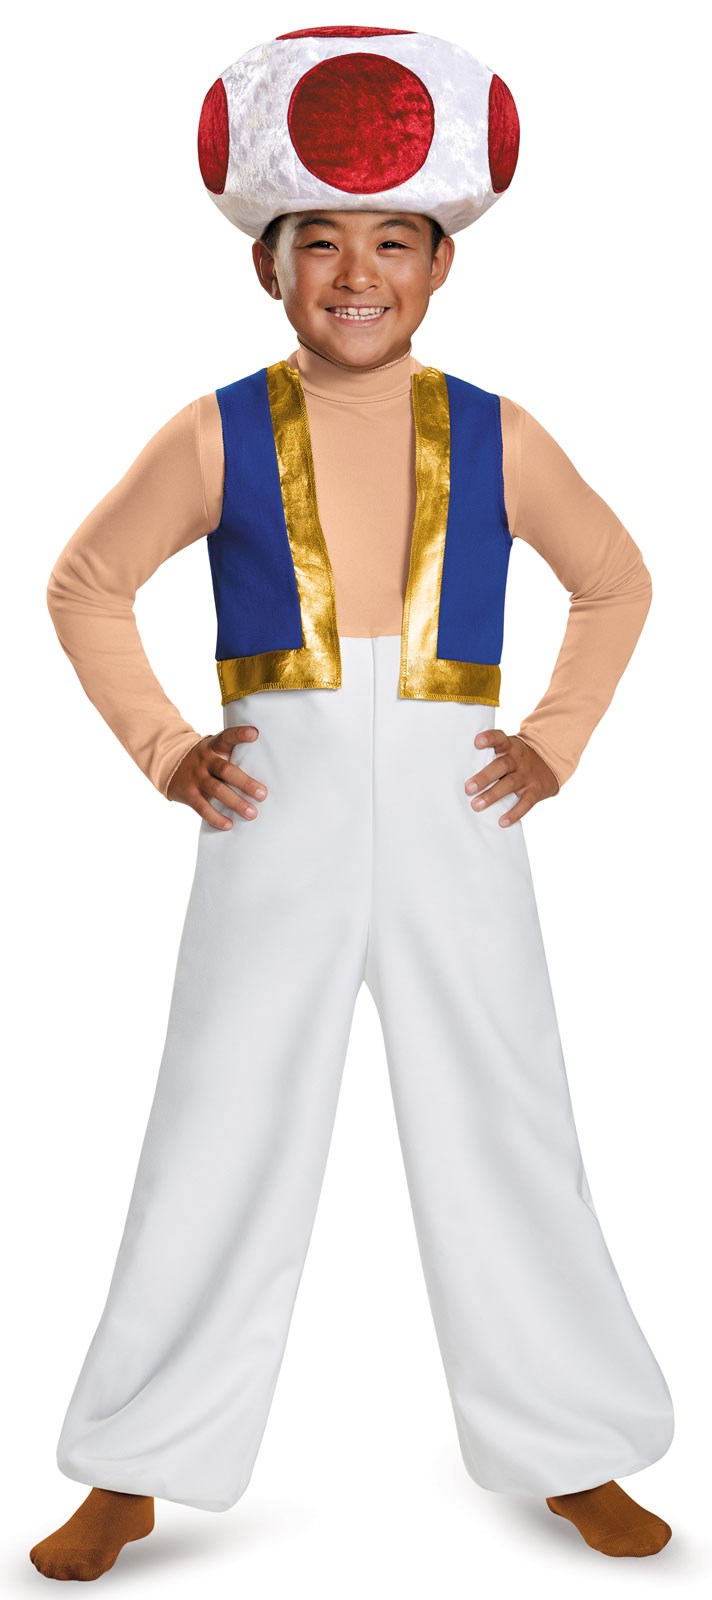 Super Mario Bros: Deluxe Toad Costume For Kids